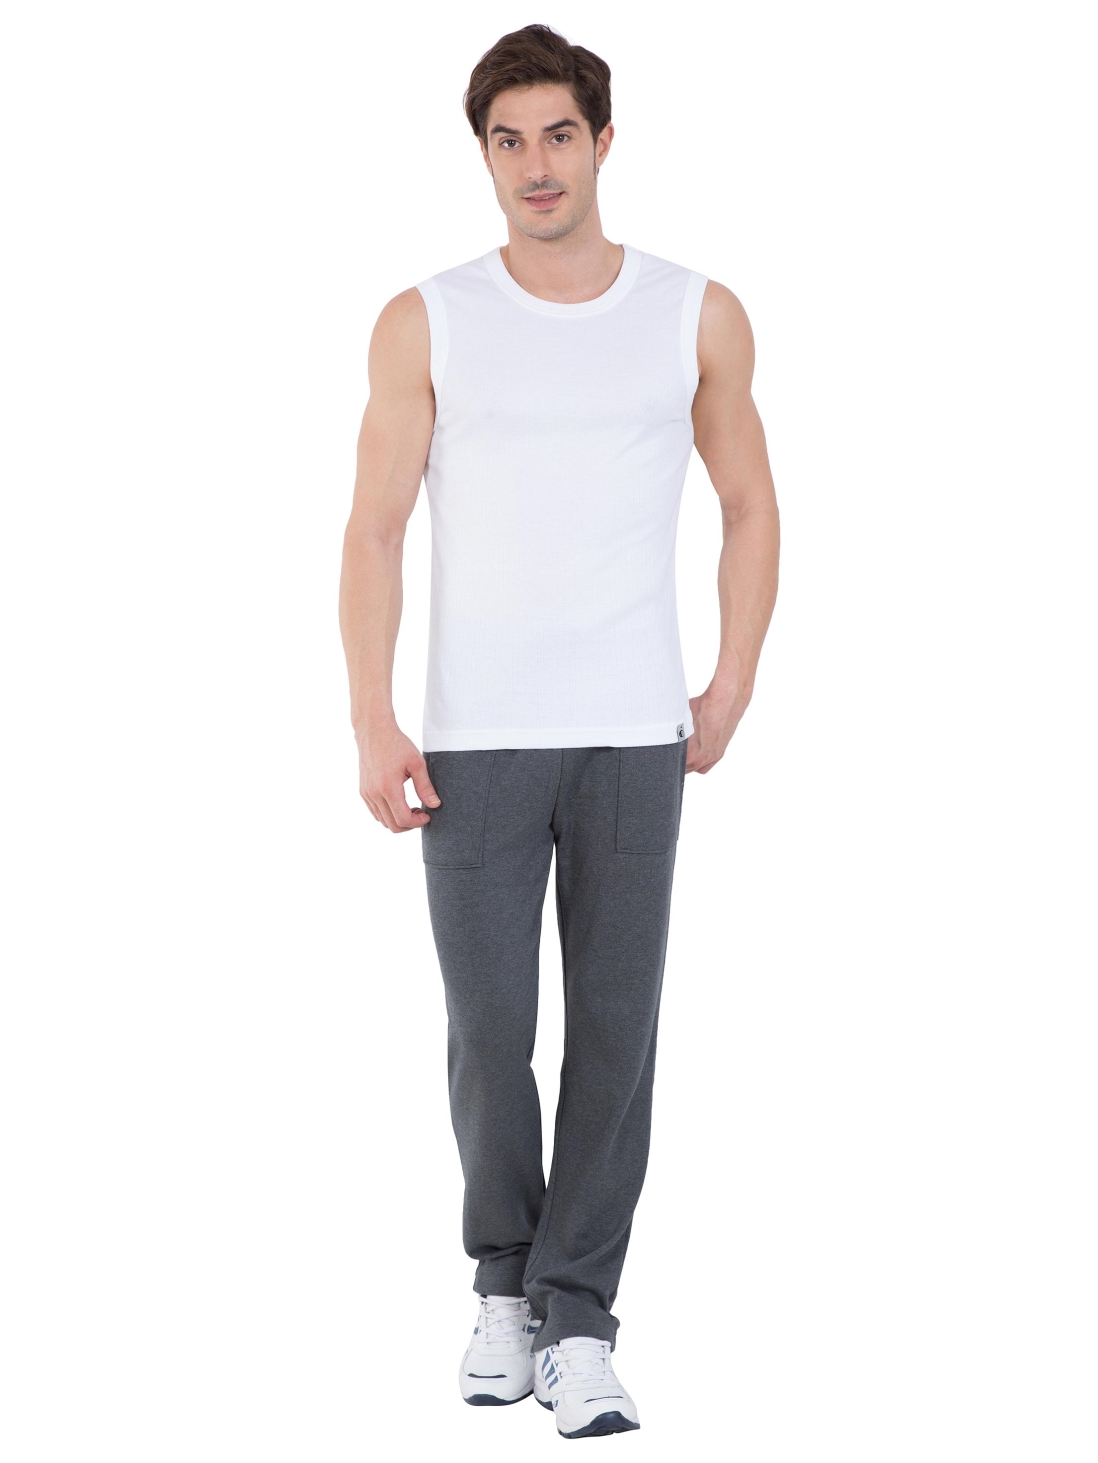 Buy Jockey White Muscle Tee - Style Number 9930 Online @ ₹299 from ...